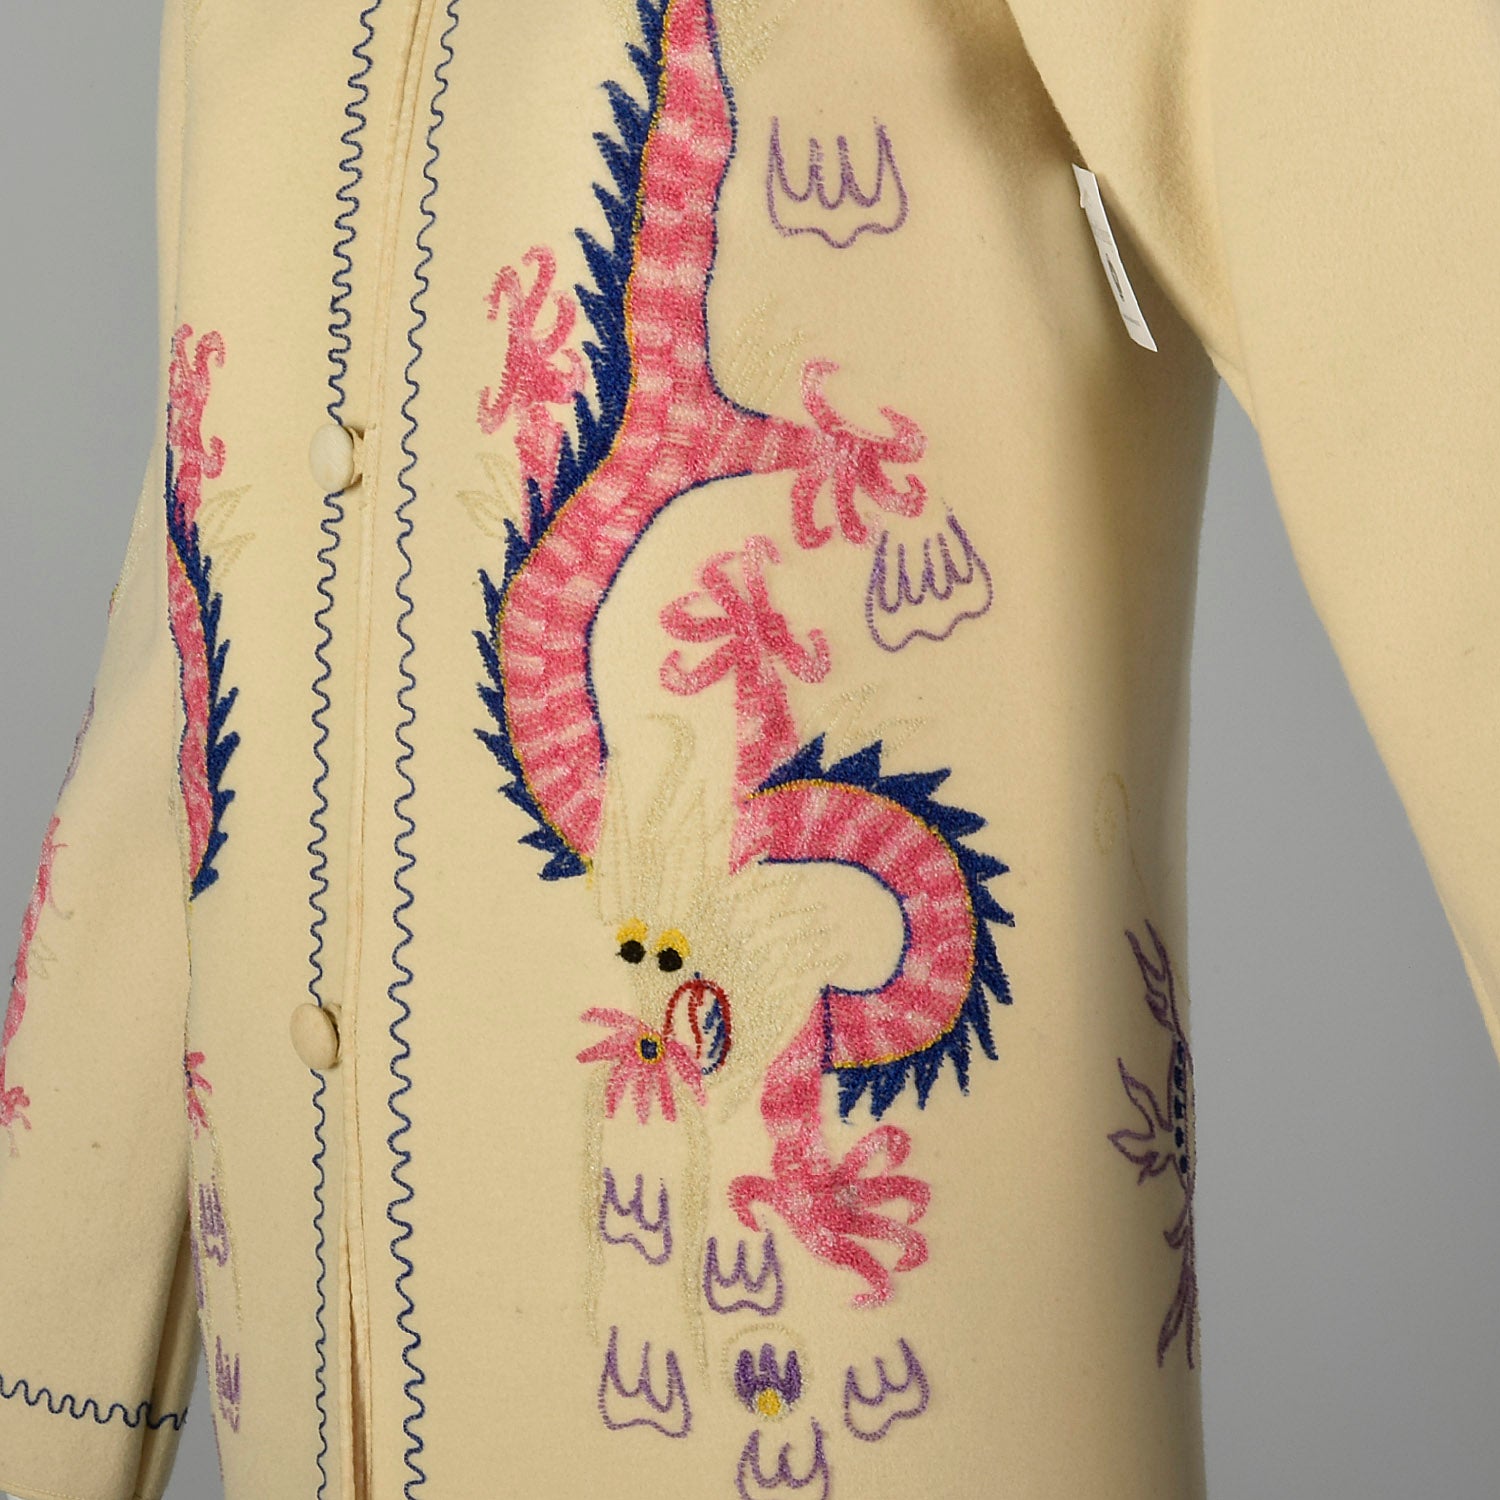 XS 1940s Souvenir Jacket Novelty Asian Dragon Chain Stitch Embroidery Cream Wool